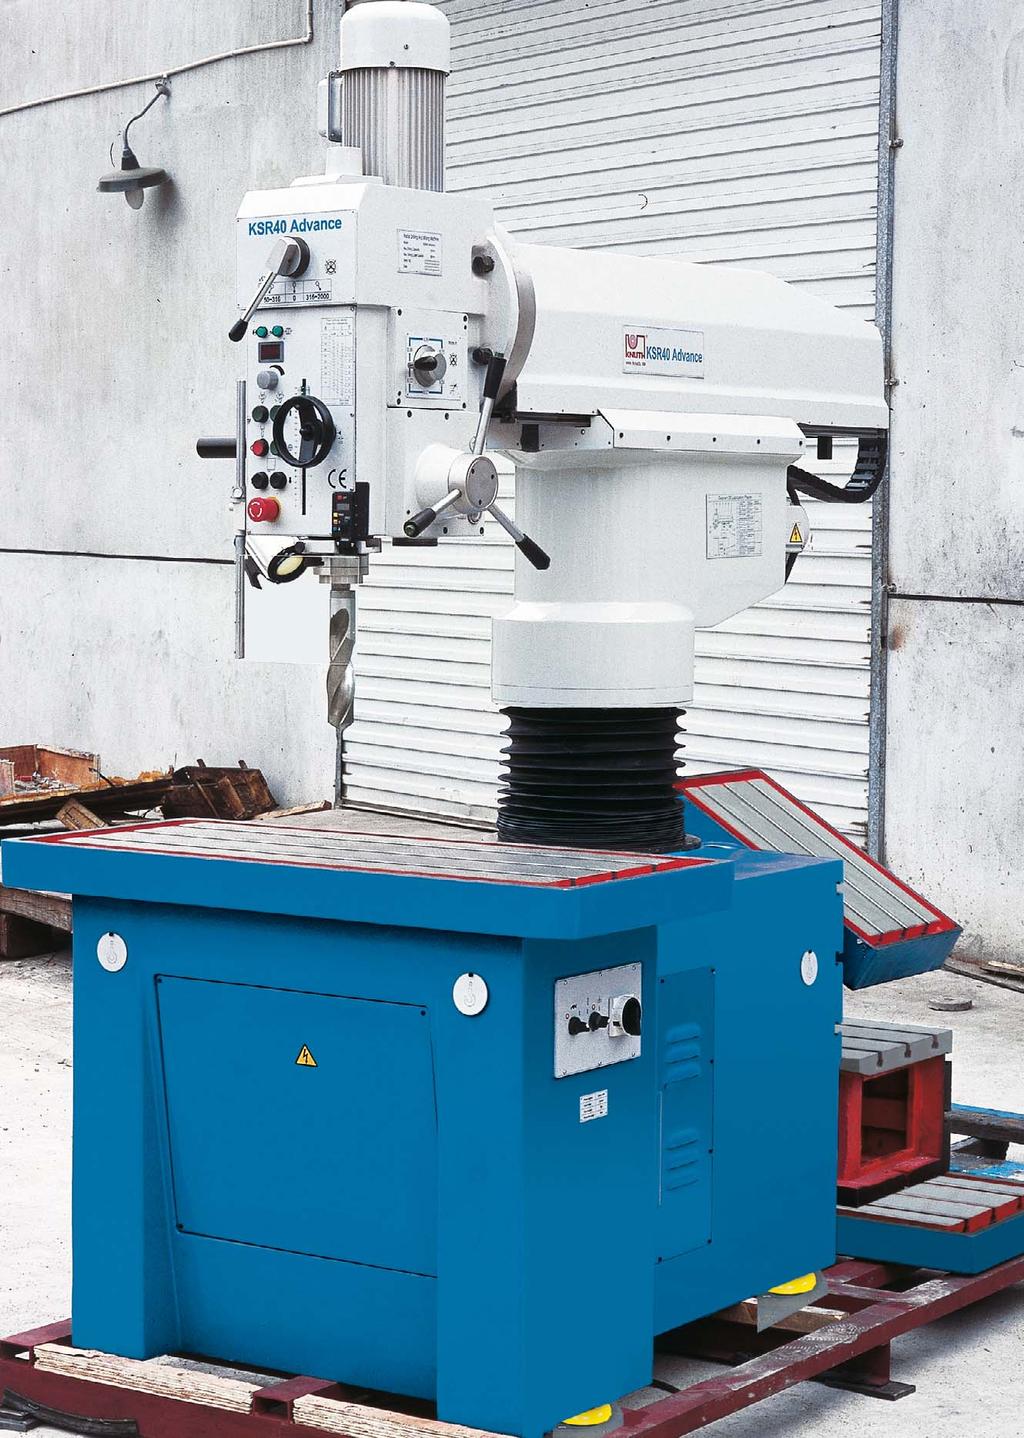 162 364 Standard Equipment: digital speed indicator, additional setup areas at the side and rear, cube table, swivelling horizontal table, digital boring depth indicator, halogen work lamp,